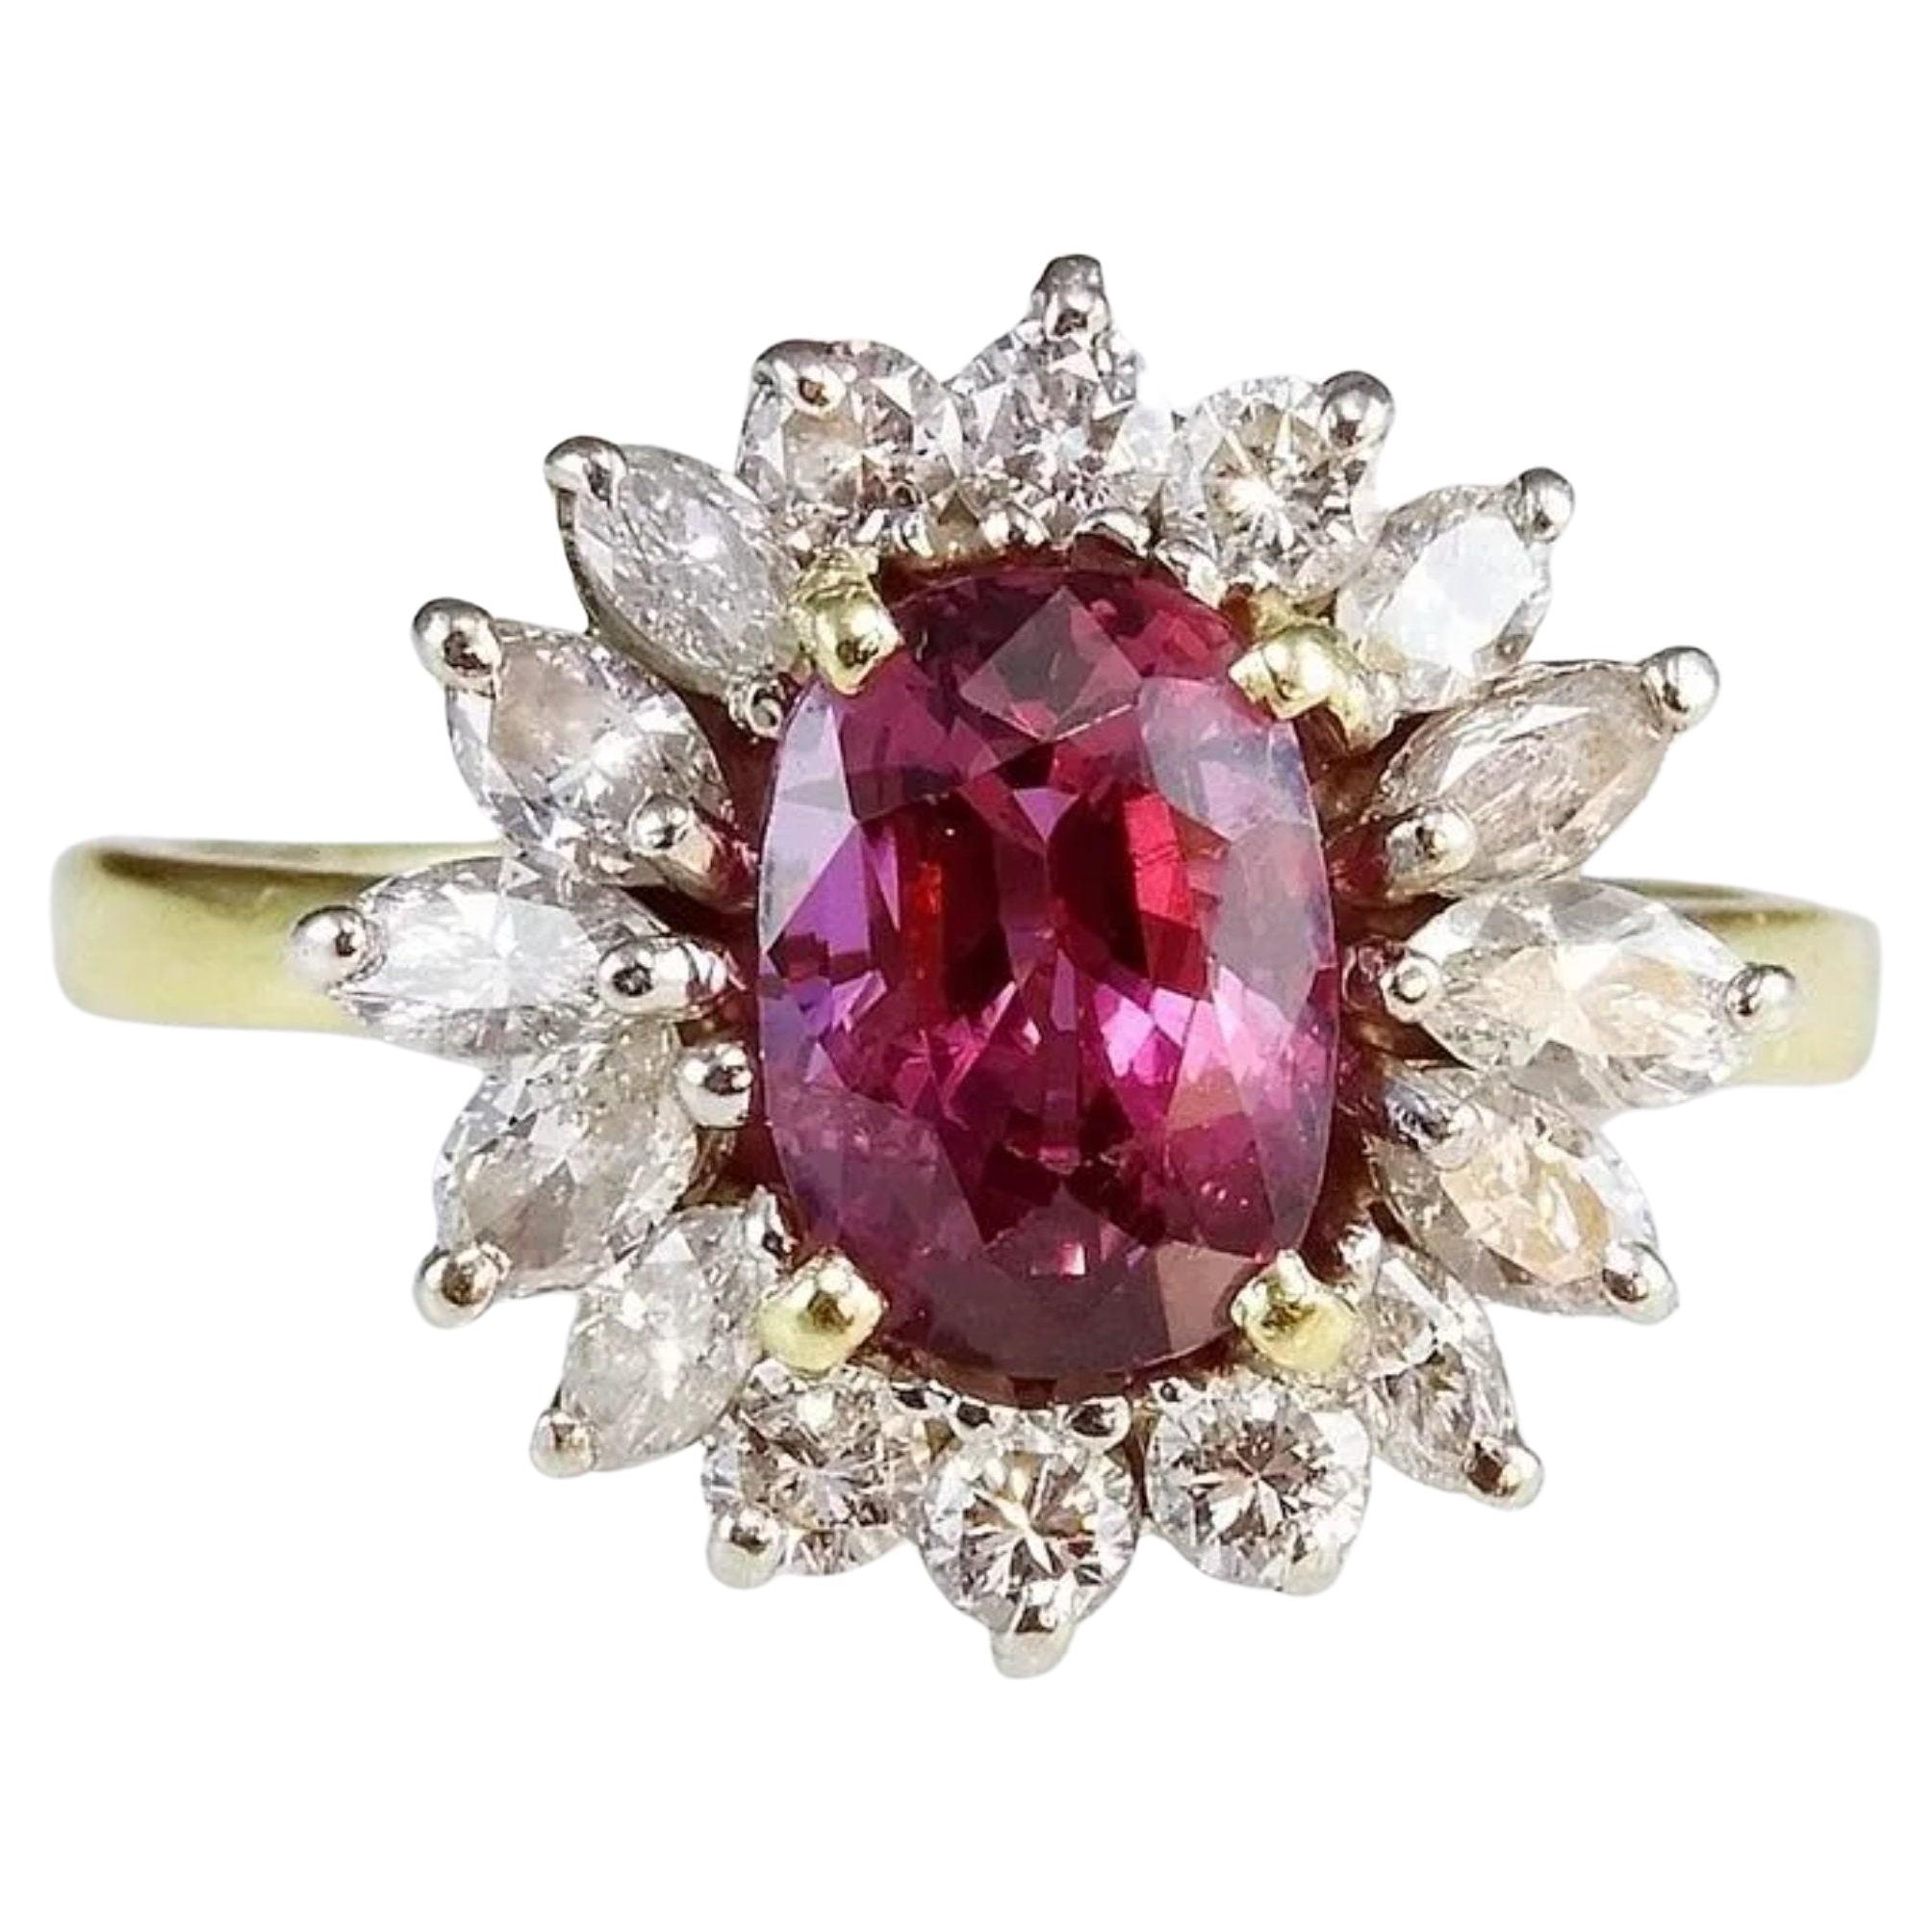 For Sale:  3.6 Carat Floral Ruby Diamond Engagement Ring Art Deco Ruby Diamond Wedding Ring